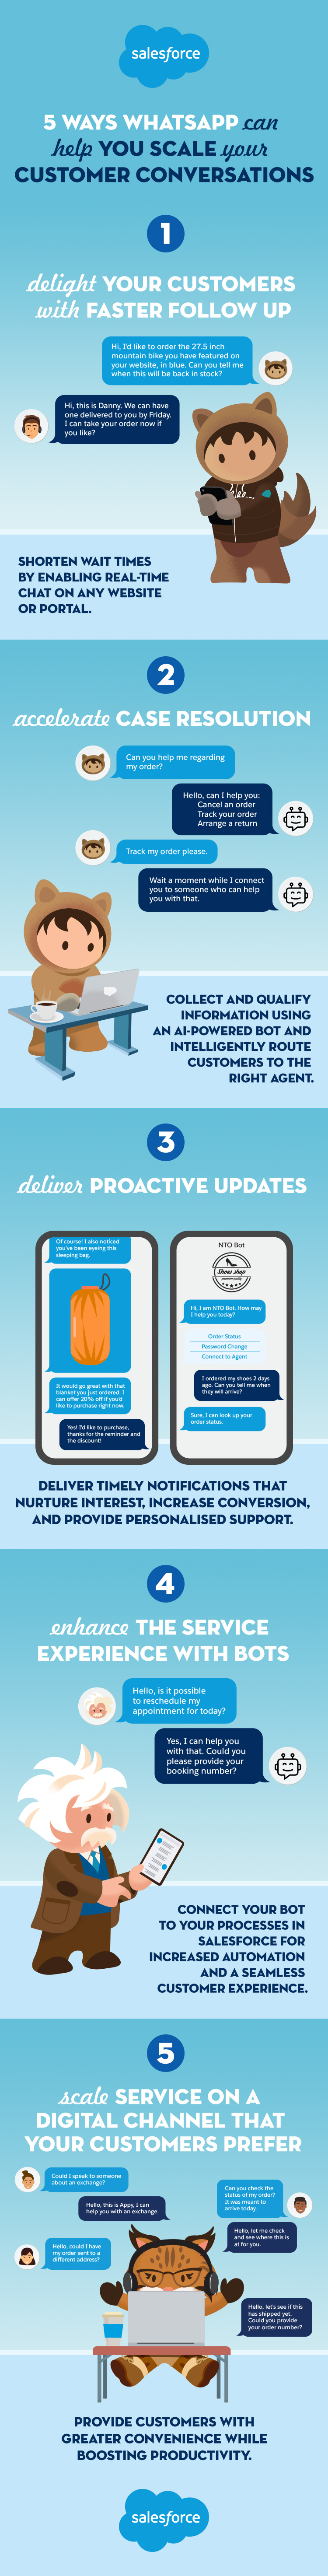 Today's ultra-connected customers expect service delivered on their terms. This infographic shows how WhatsApp can help businesses be there for customers in their moments of need. 